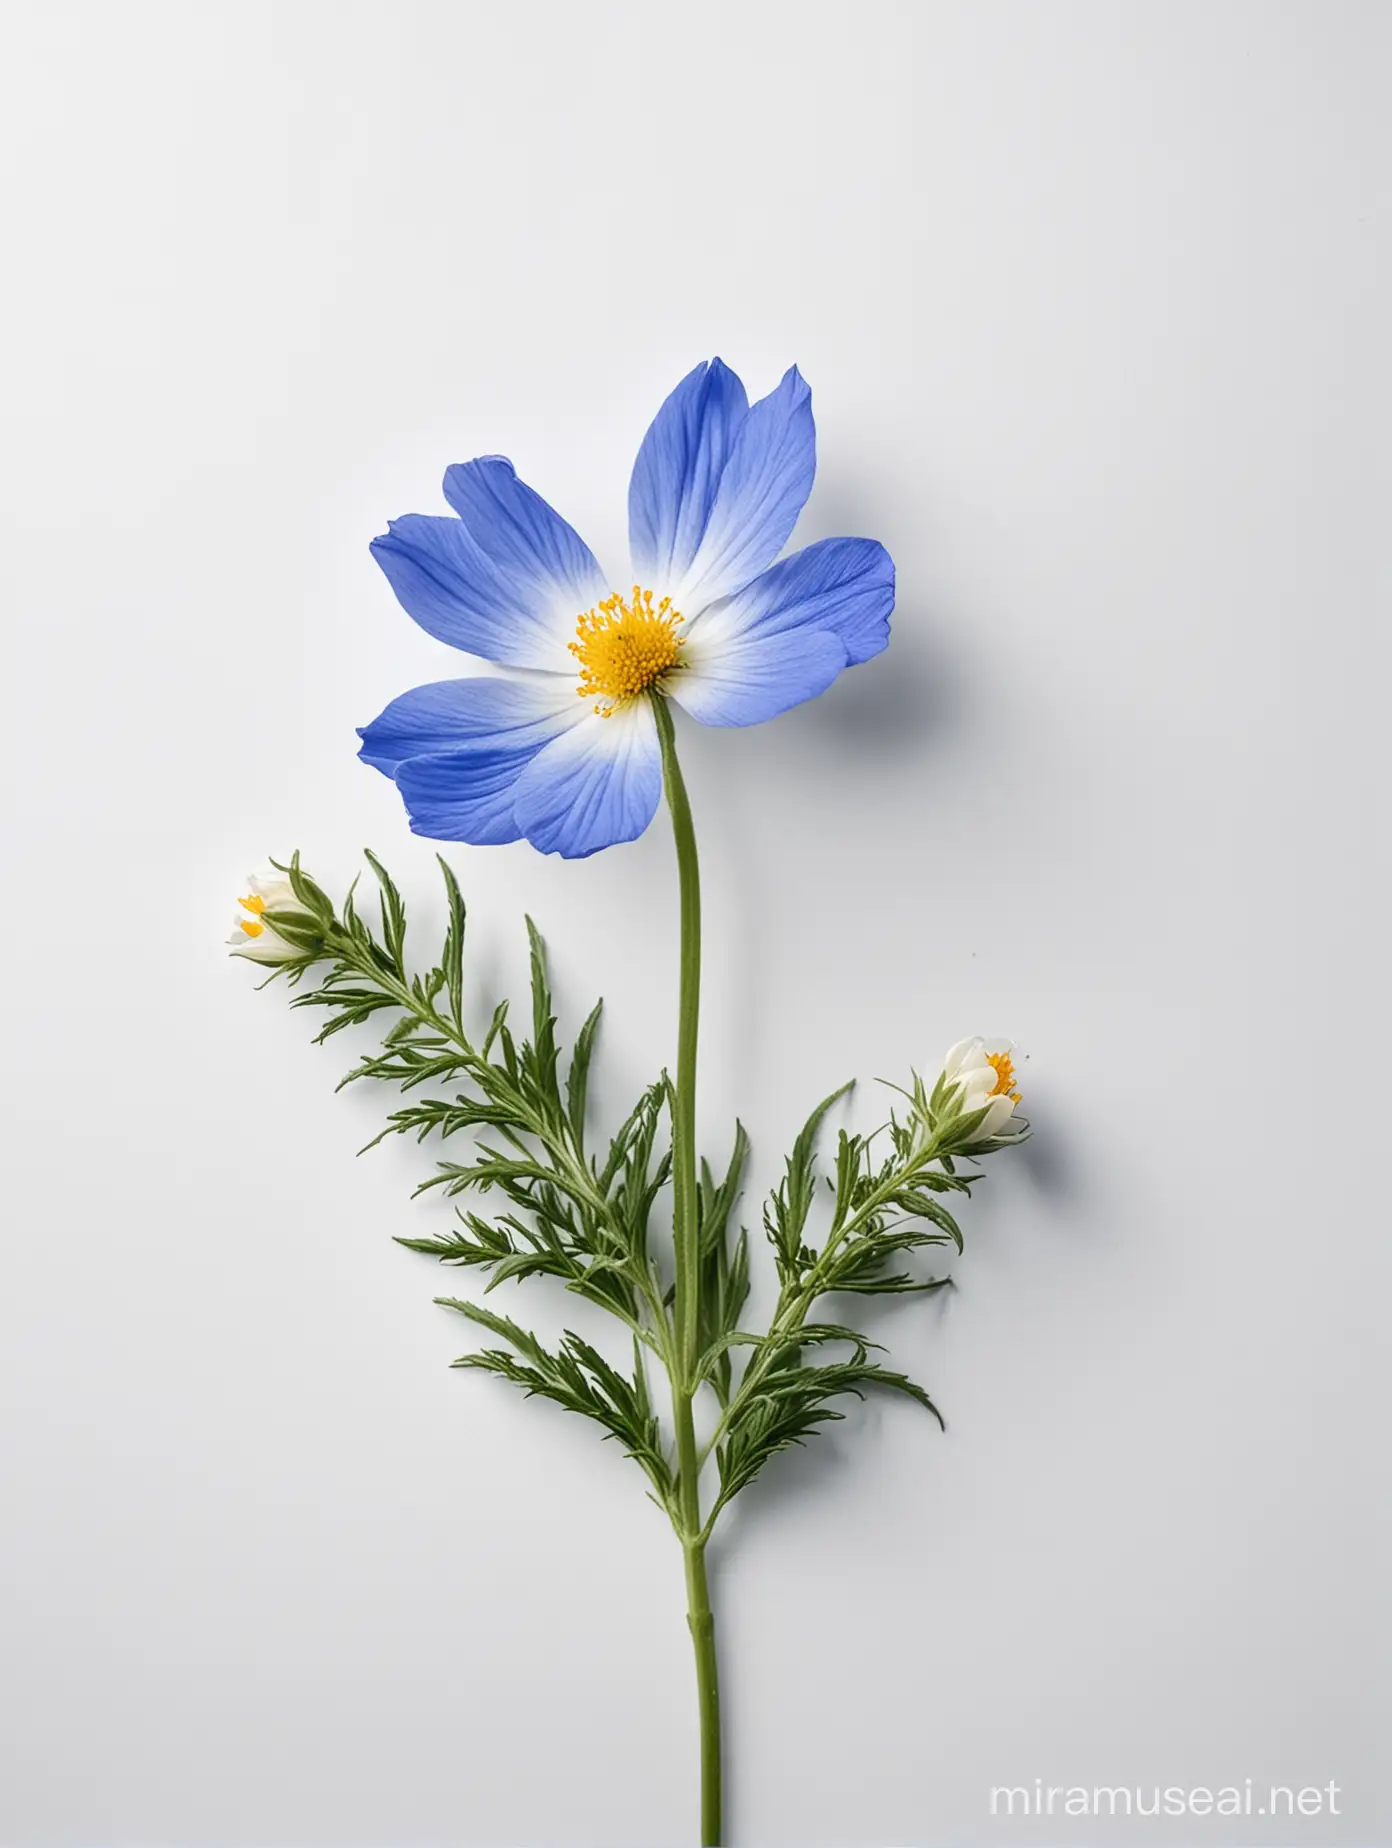 Vibrant Wildflowers on Tranquil Blue and White Background